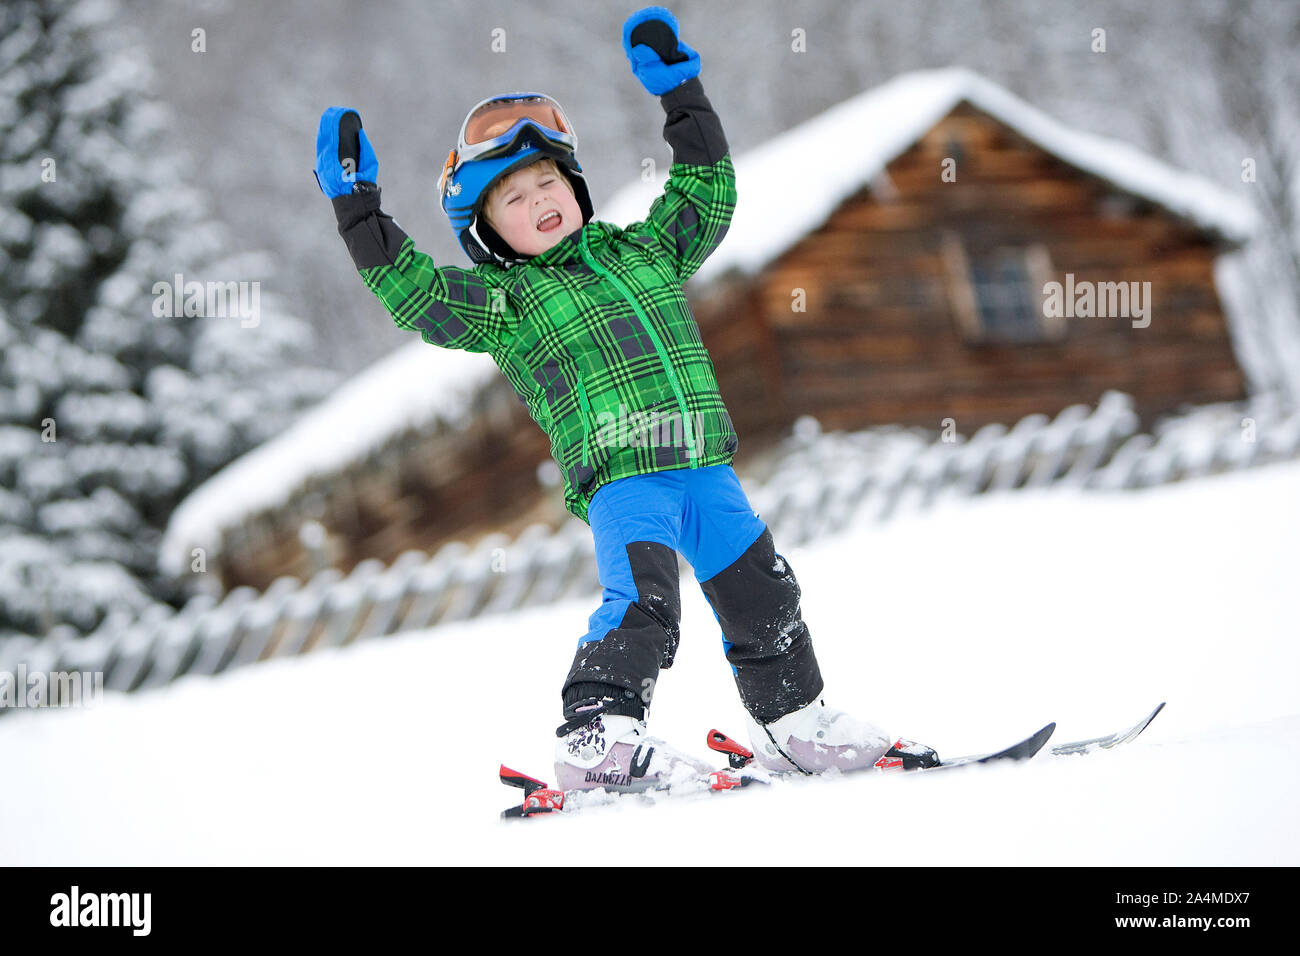 Portrait of child skiing in snow Stock Photo